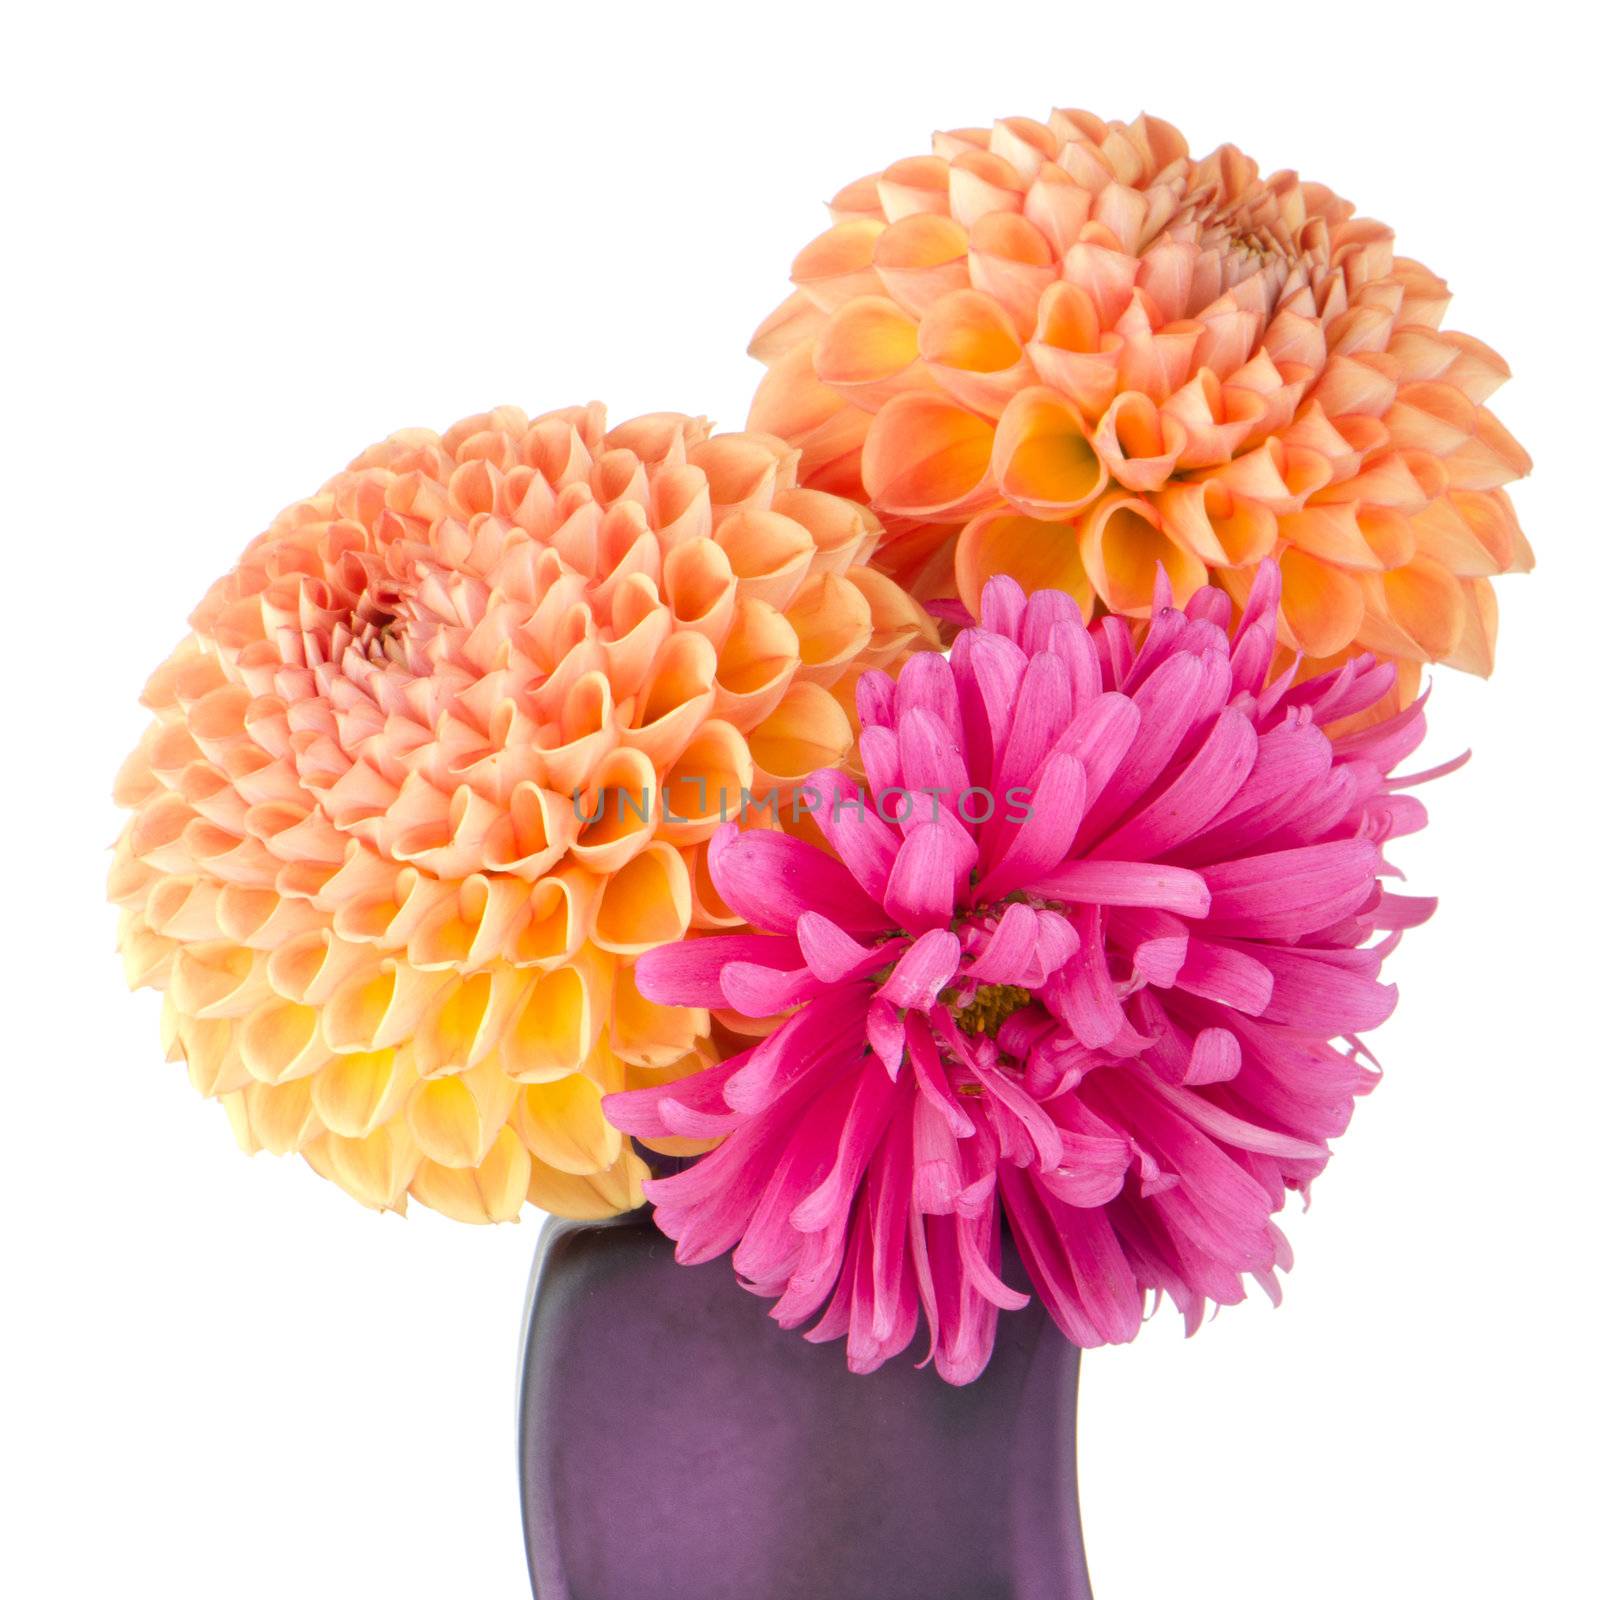 Three dahlias in purple glass vase isolated on white background.